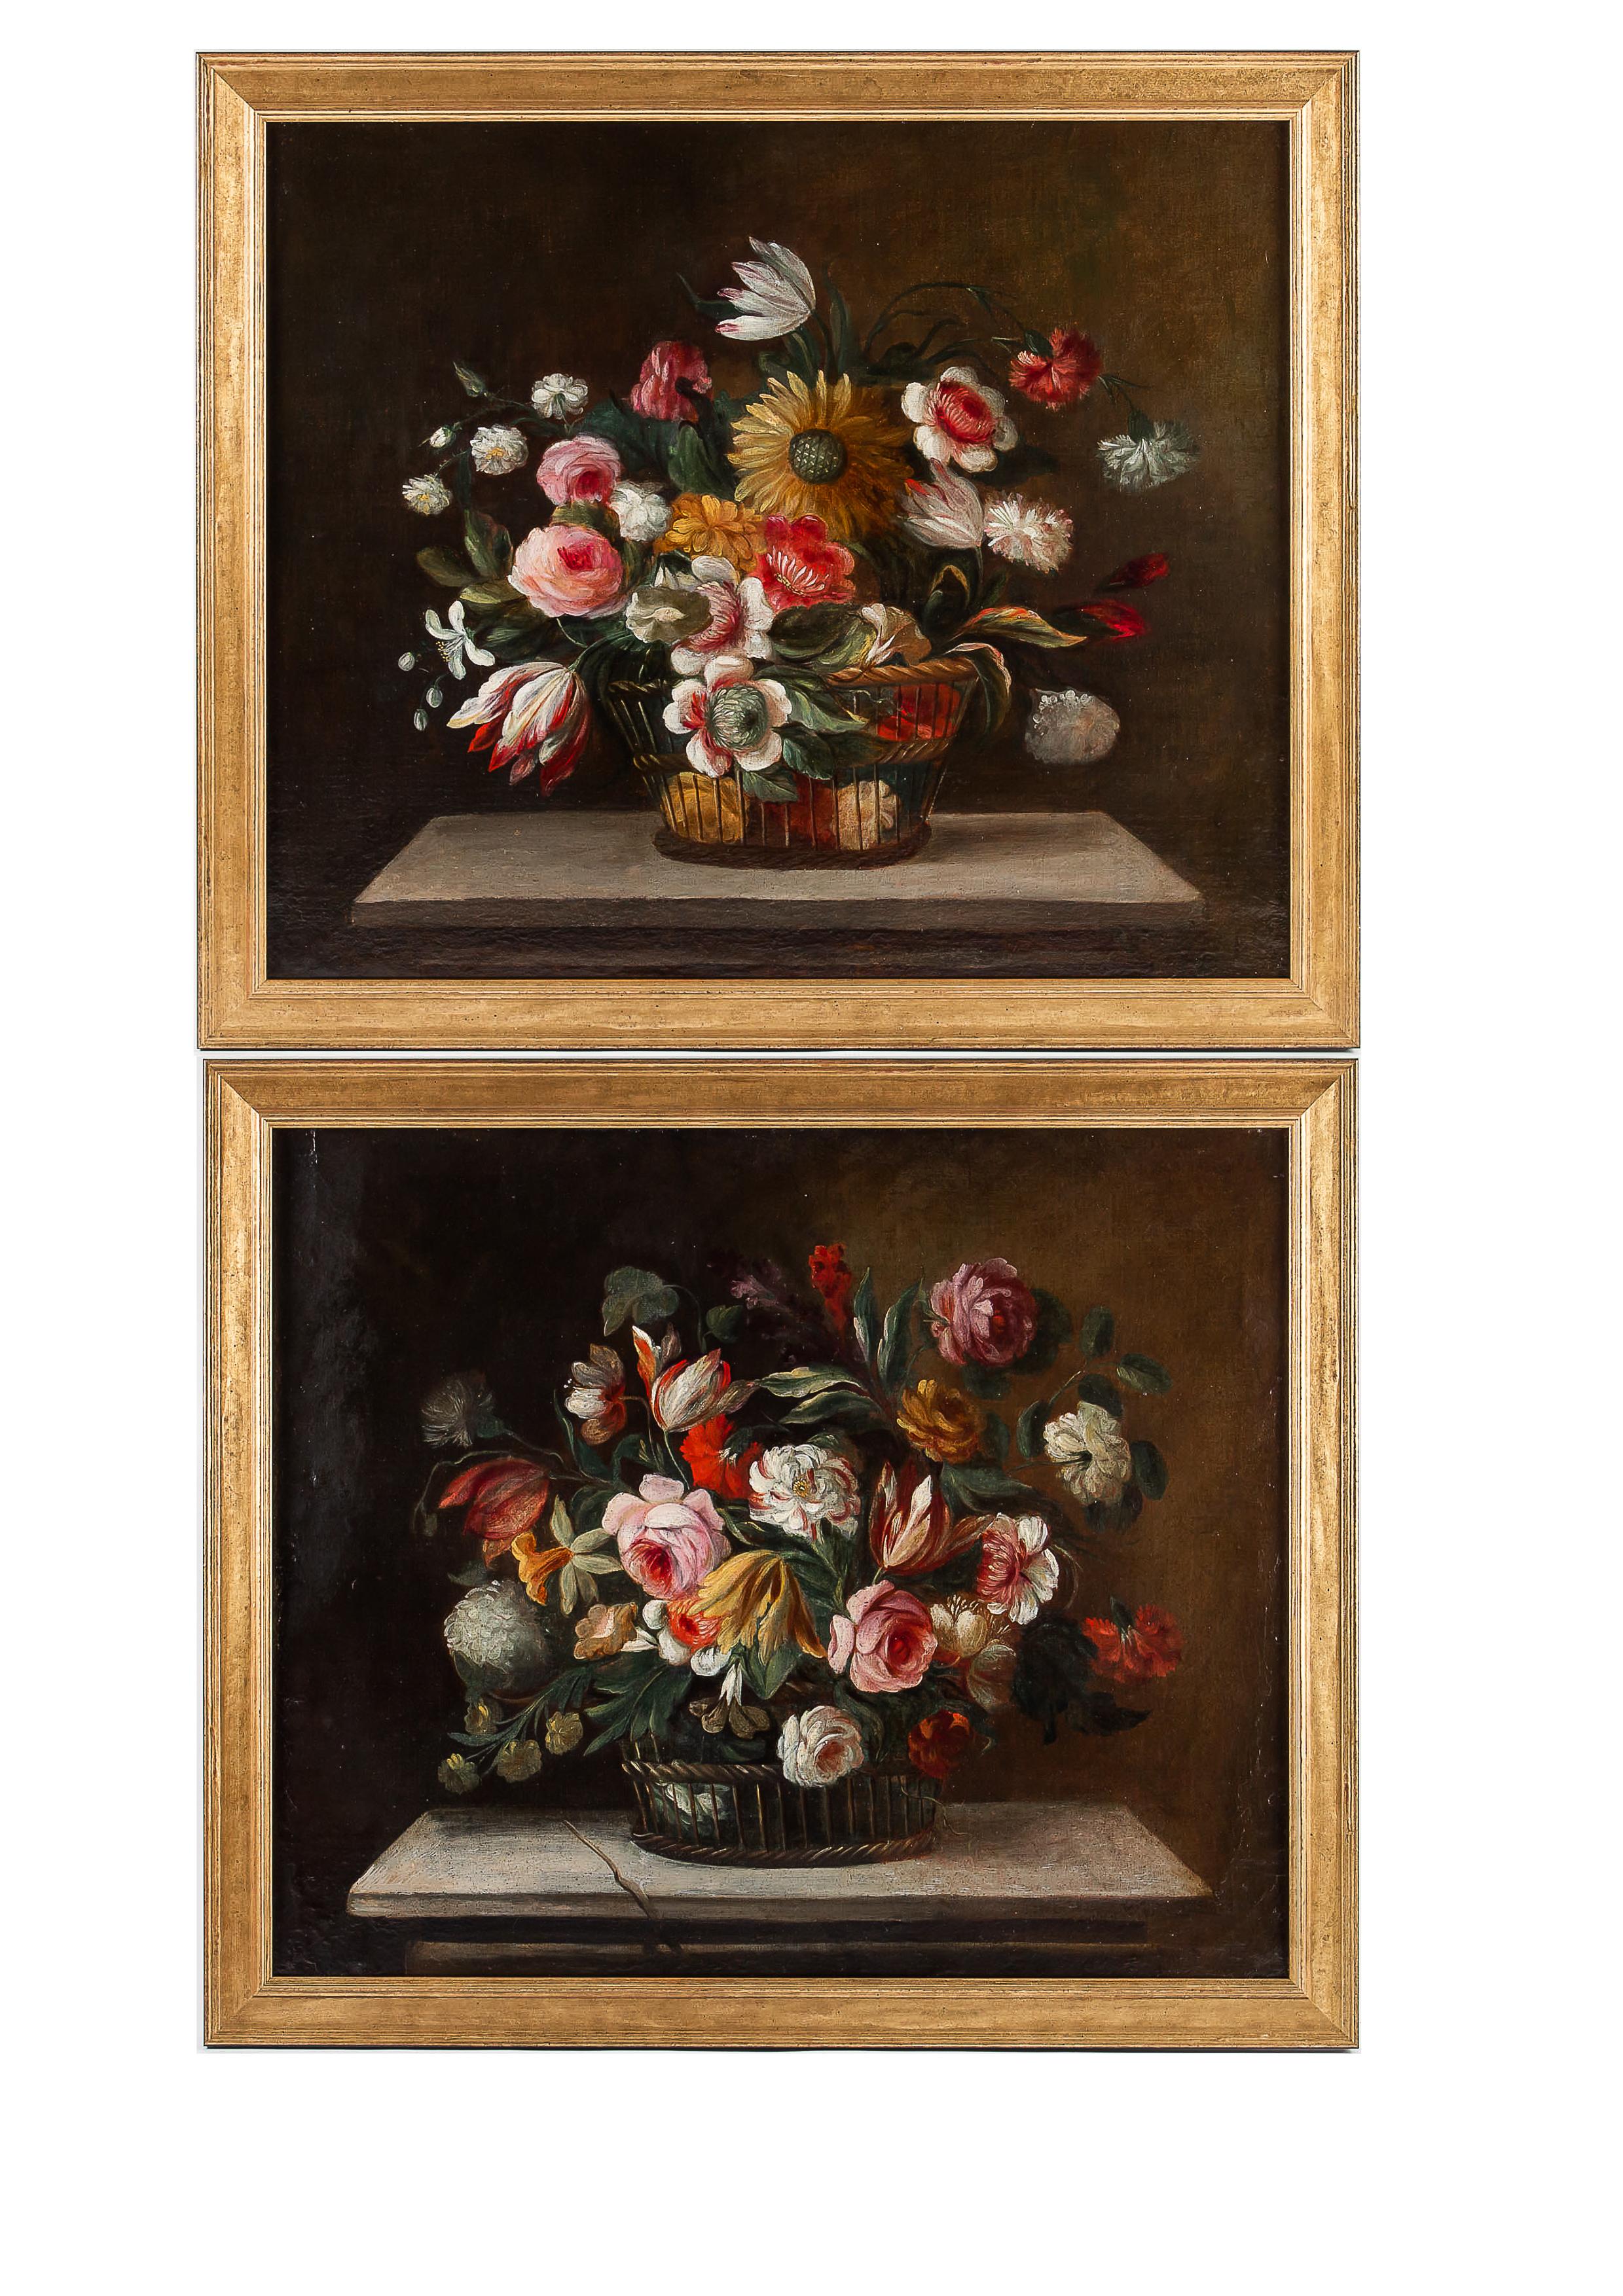 18th century French school, pair of oil on canvas bouquets of flowers with sunflower and roses.

Much quality on this lovely and decorative pair of oil on canvas, depicting flower bouquets with sunflower and Roses on marble-ledge.

Late 18th or